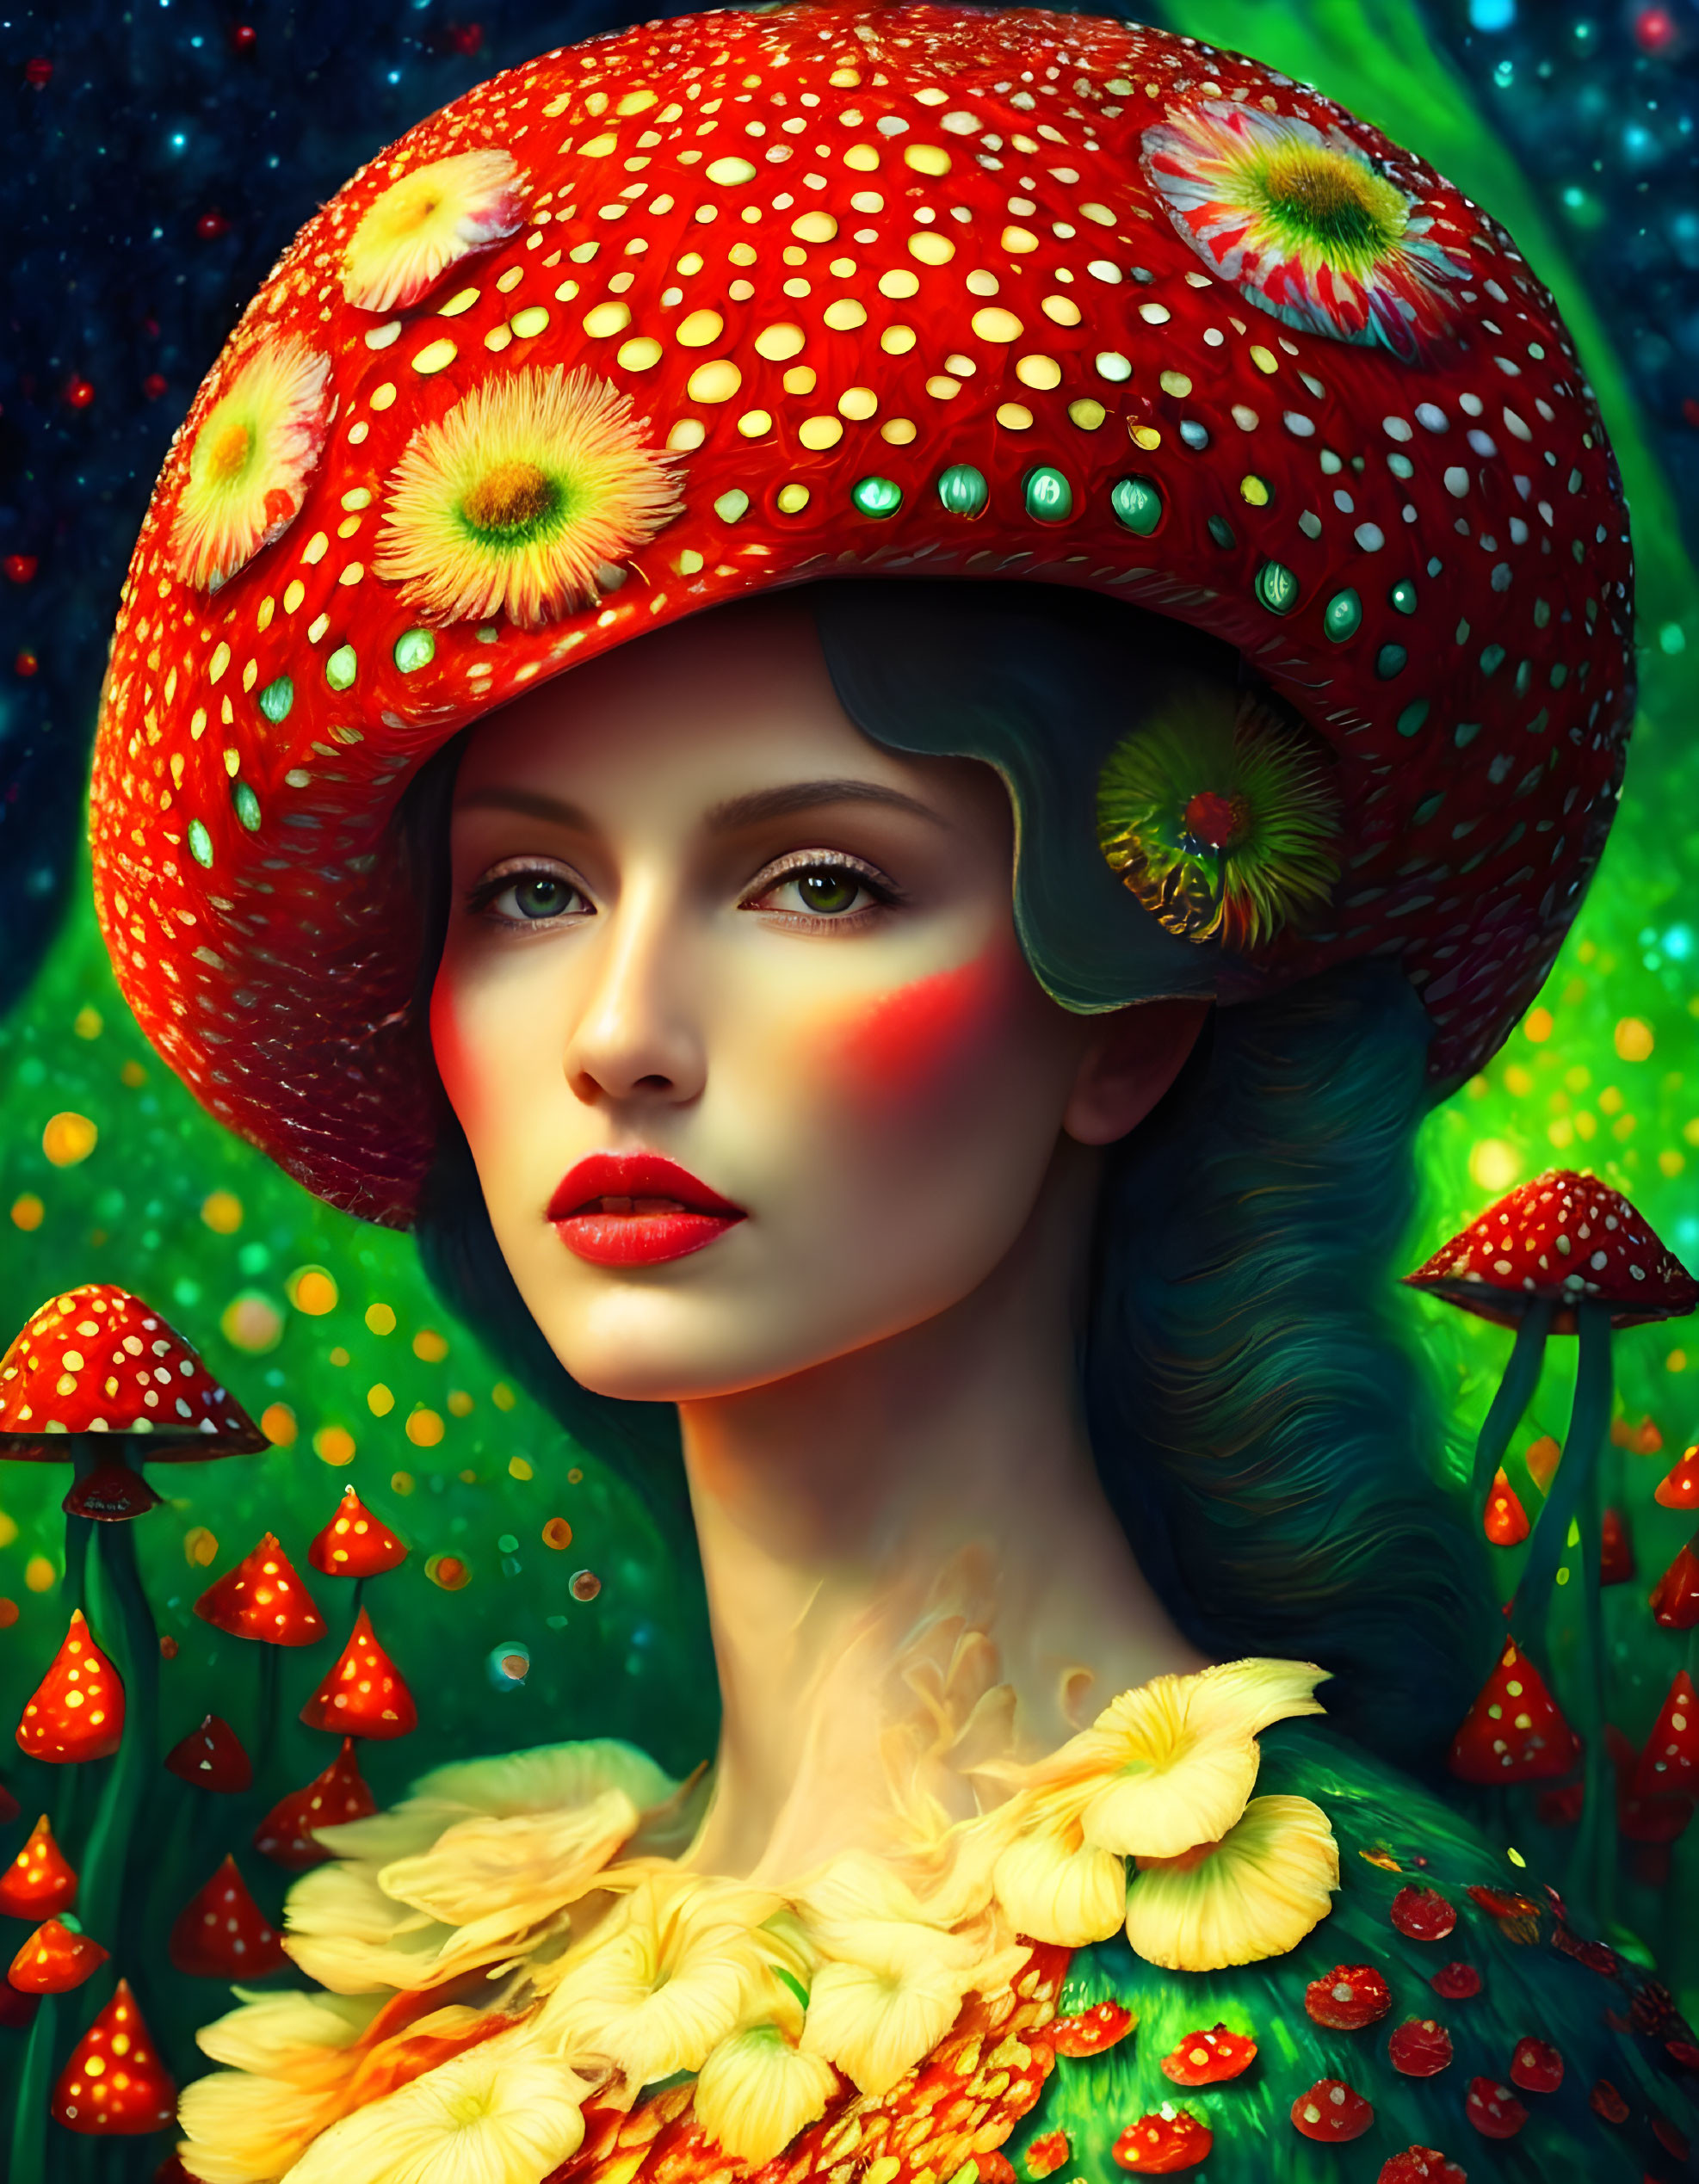 Colorful woman with mushroom cap hat in fantasy setting.